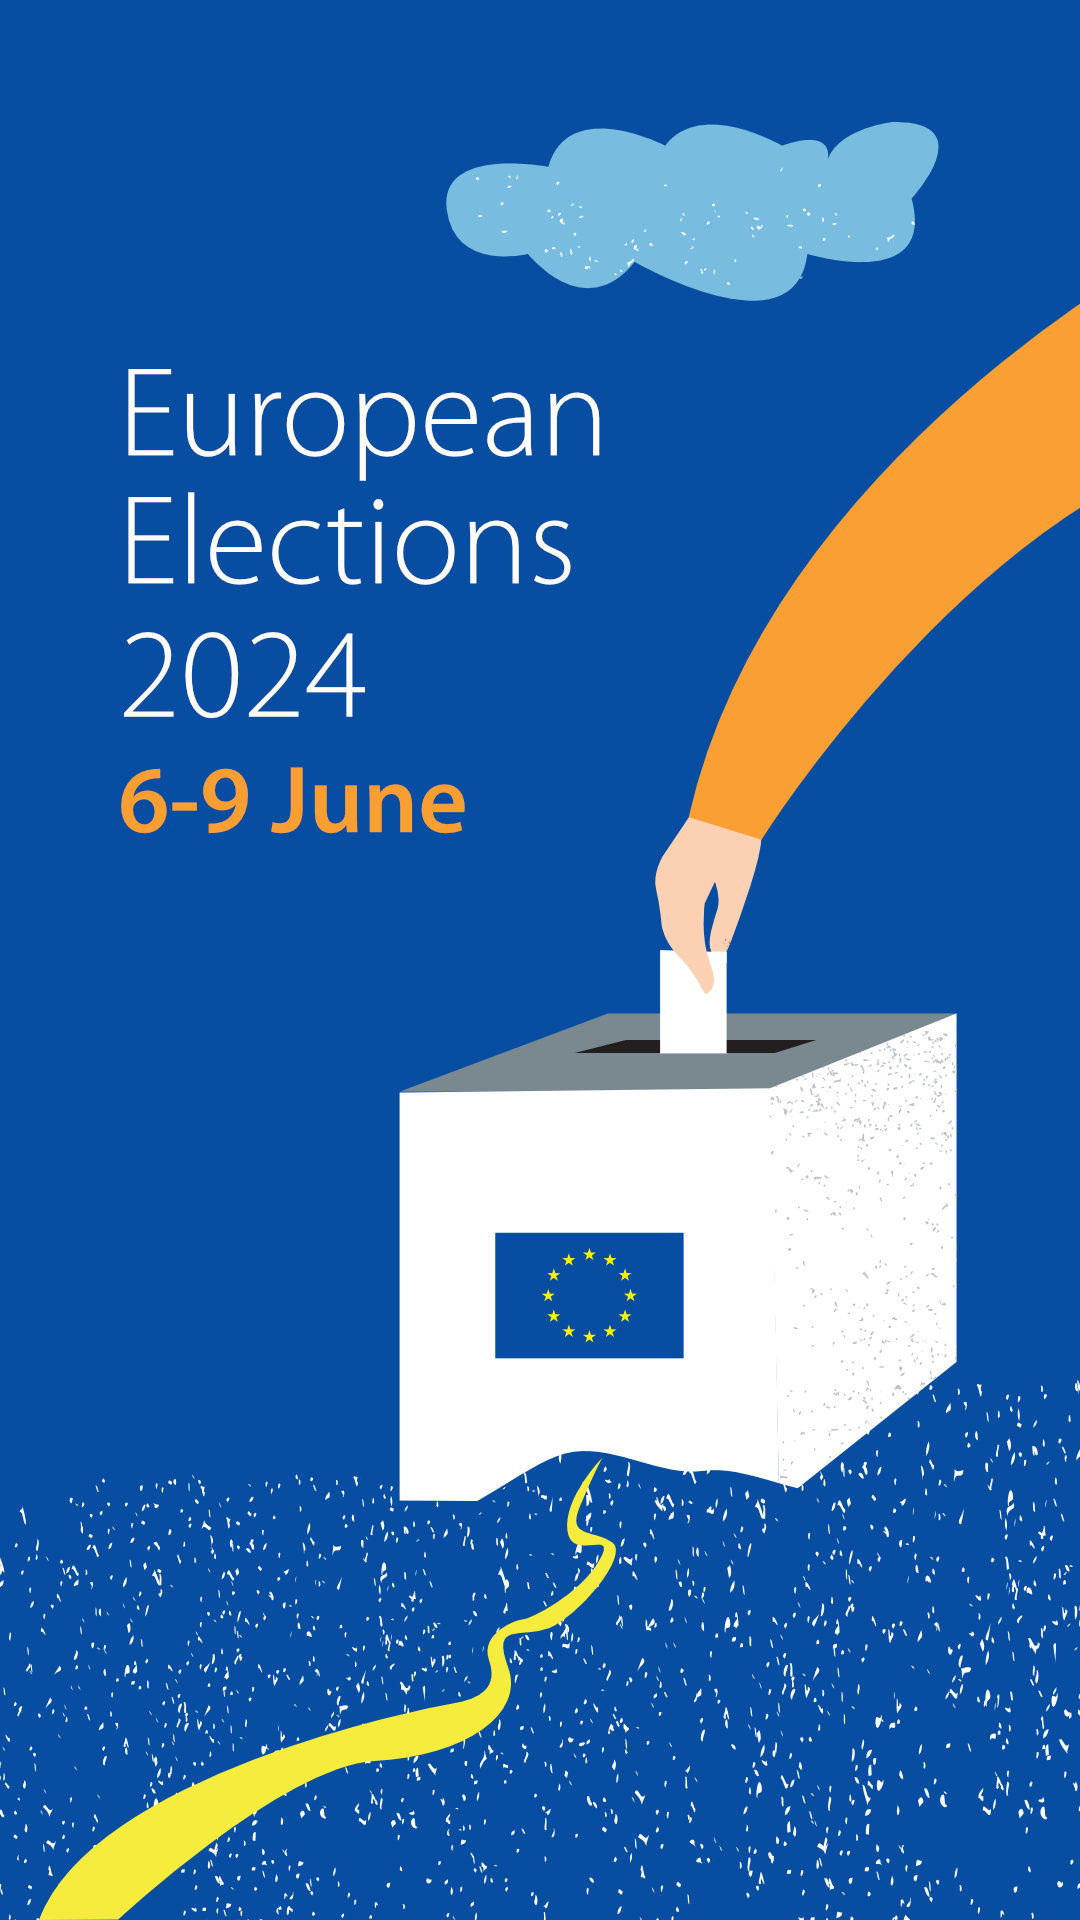 European Elections 2024 - Story